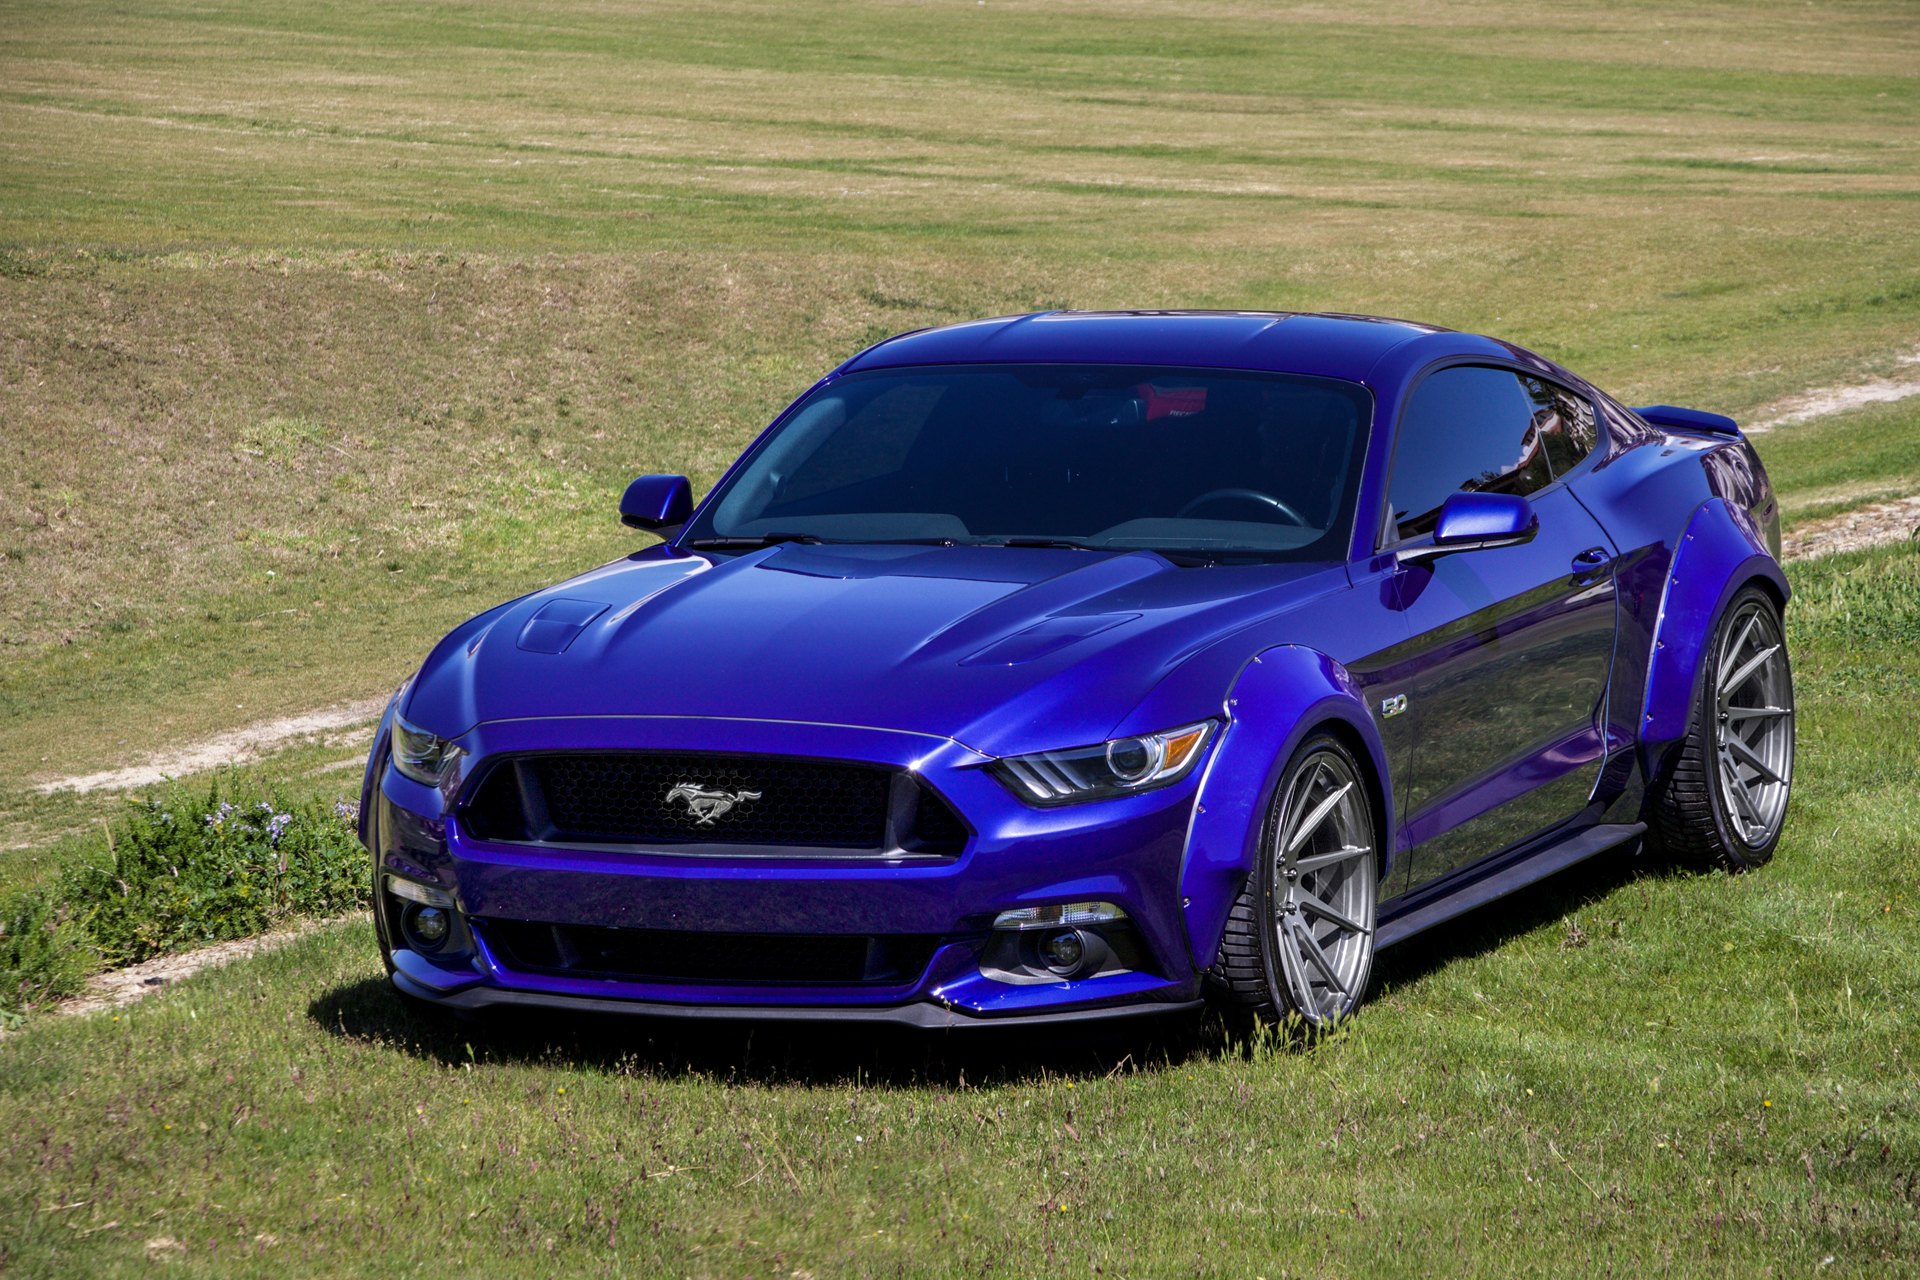 Blue Awesomeness Ford Mustang 5.0 Taken to Another Level